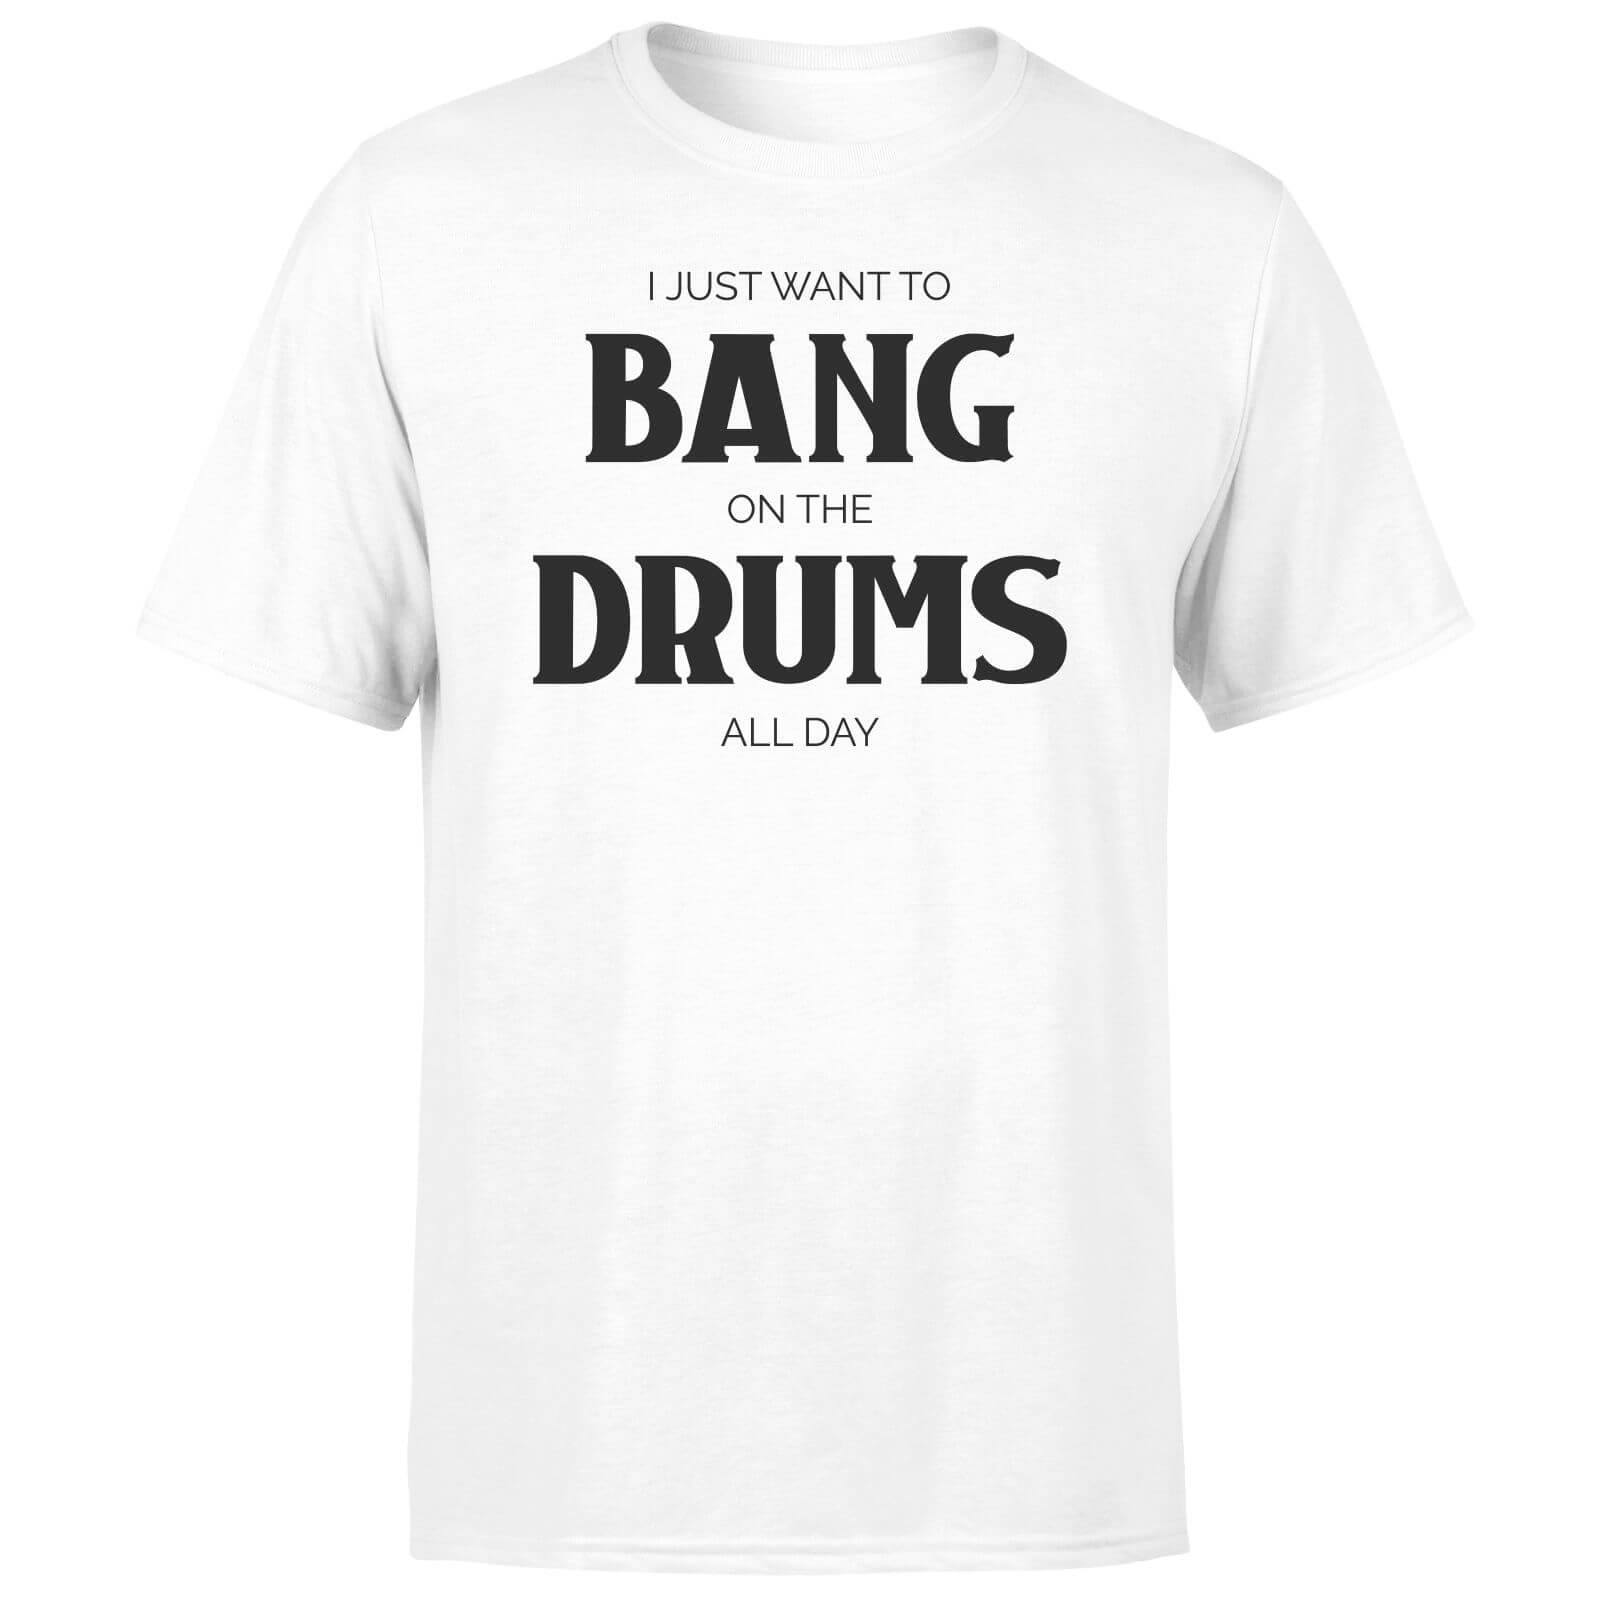 I Just Want To Bang On The Drums All Day Men's T-Shirt - White - XS - White